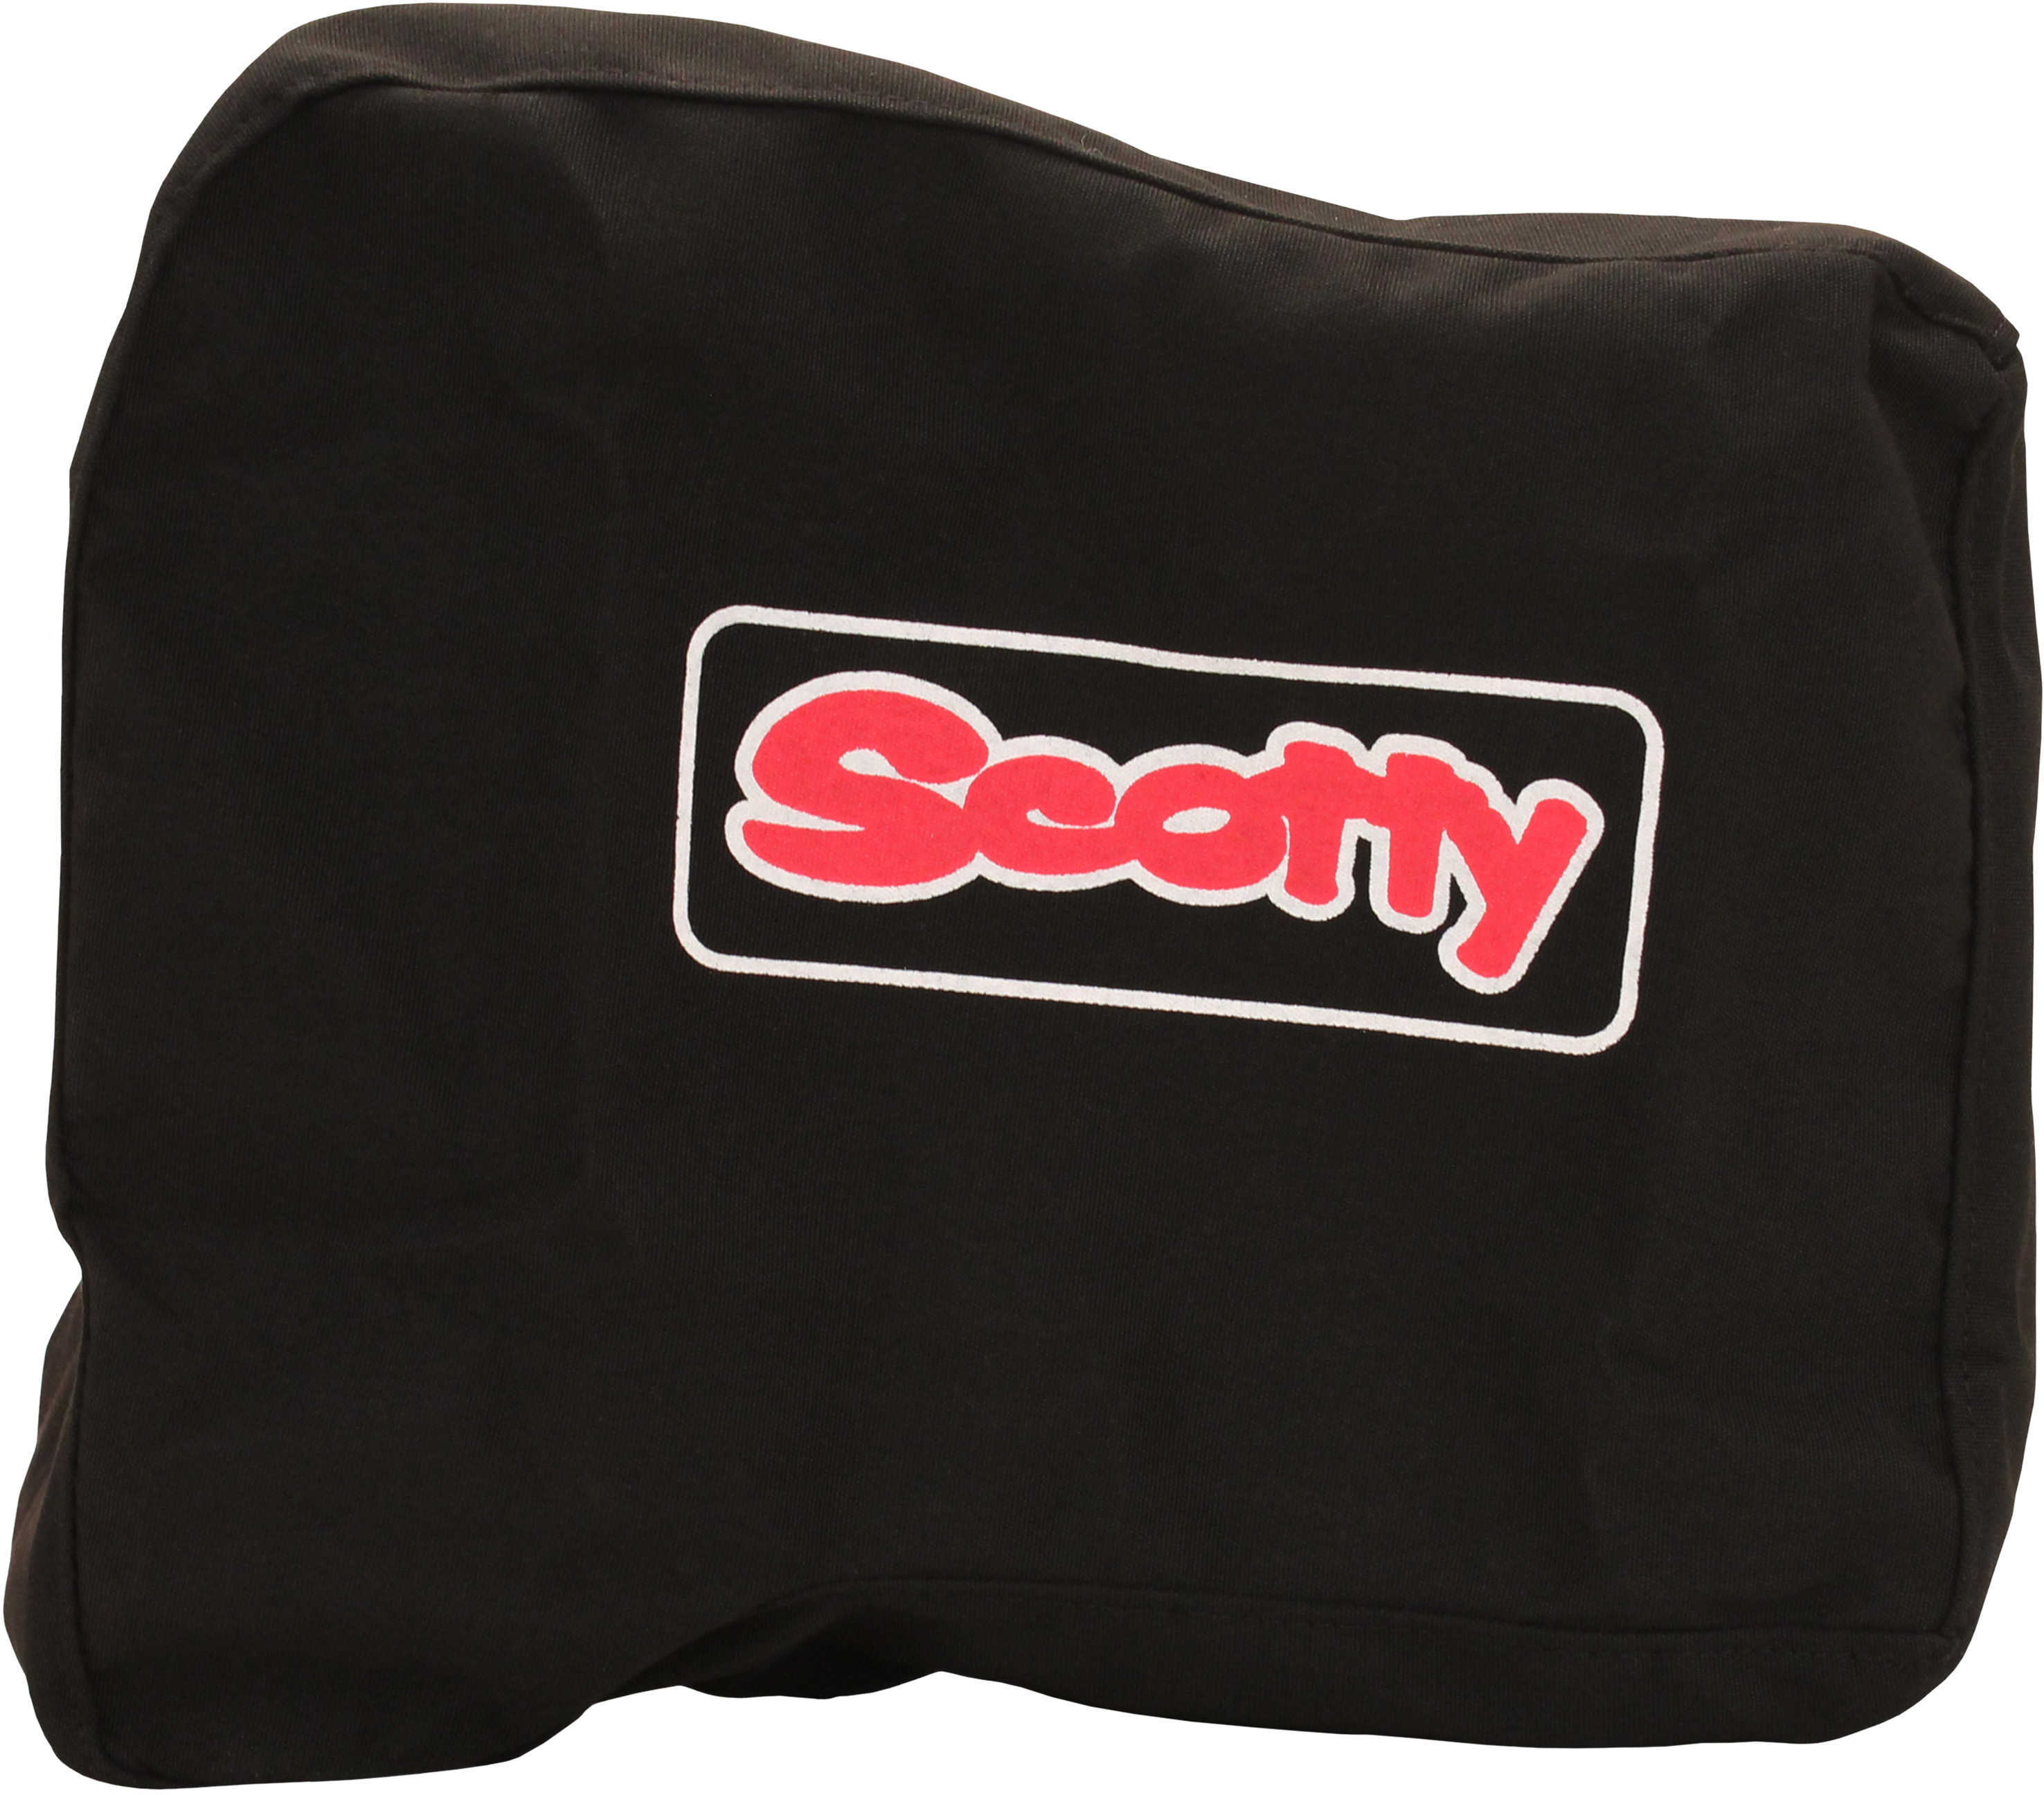 Scotty Cover, Fabric For Electric downriggers